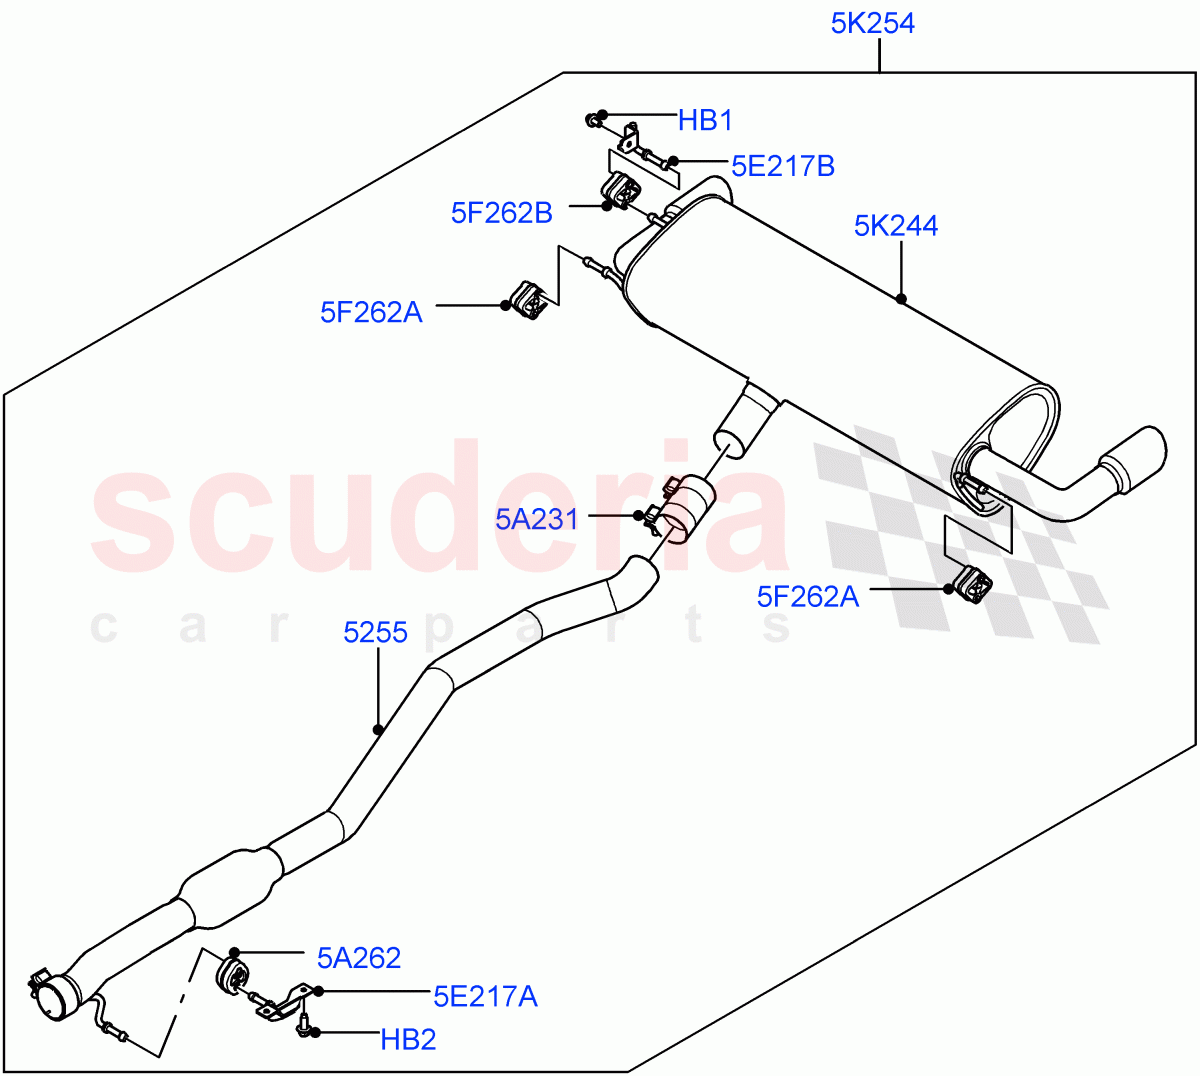 Rear Exhaust System(2.0L 16V TIVCT T/C 240PS Petrol,Itatiaia (Brazil))((V)FROMGT000001) of Land Rover Land Rover Range Rover Evoque (2012-2018) [2.0 Turbo Petrol GTDI]